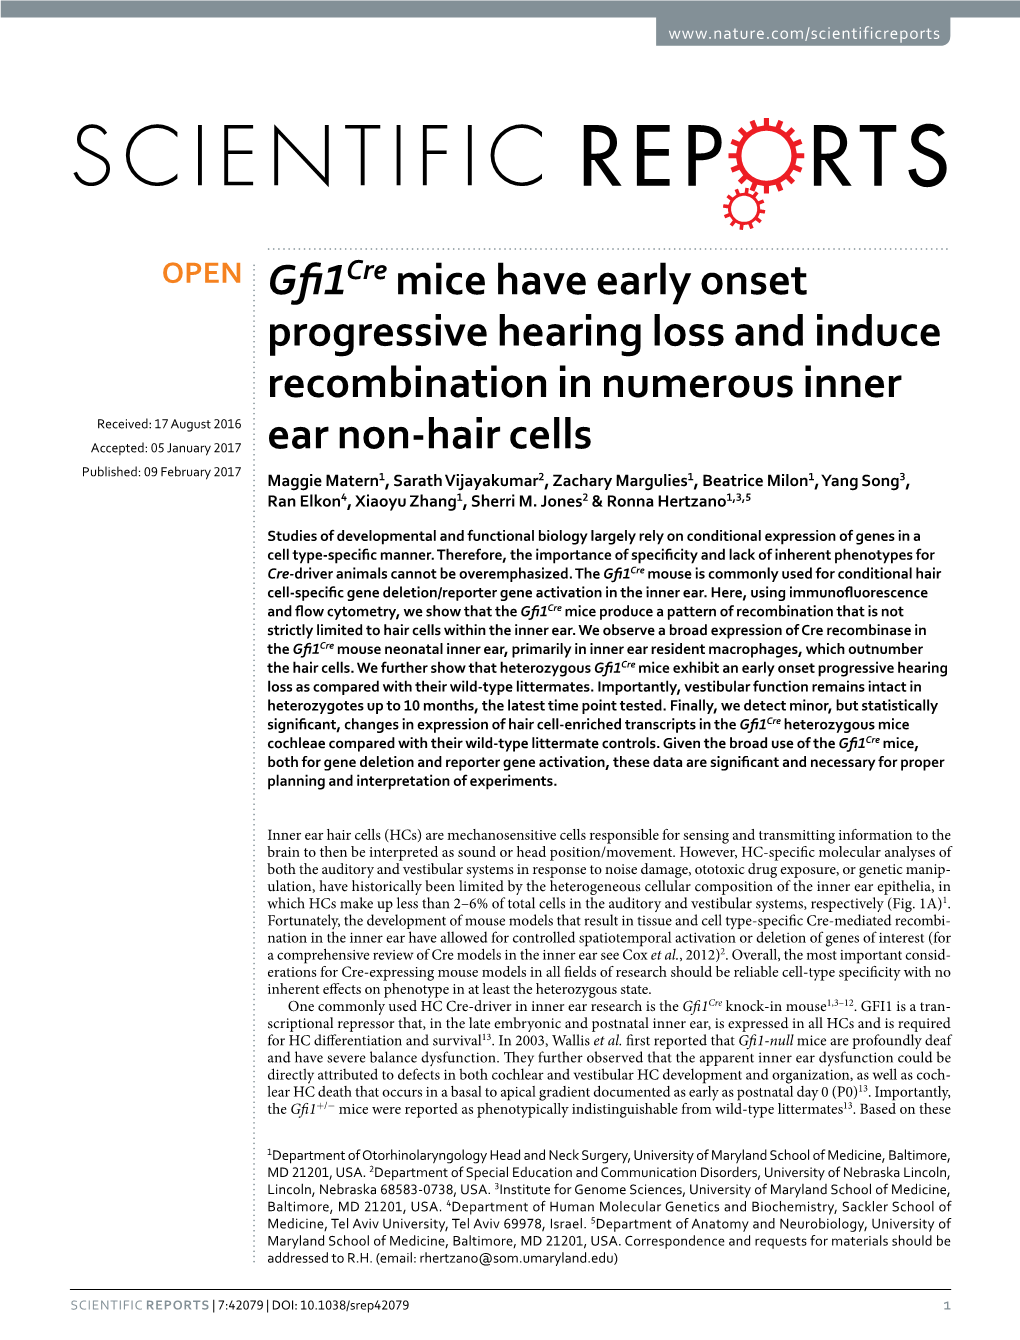 Gfi1cre Mice Have Early Onset Progressive Hearing Loss And